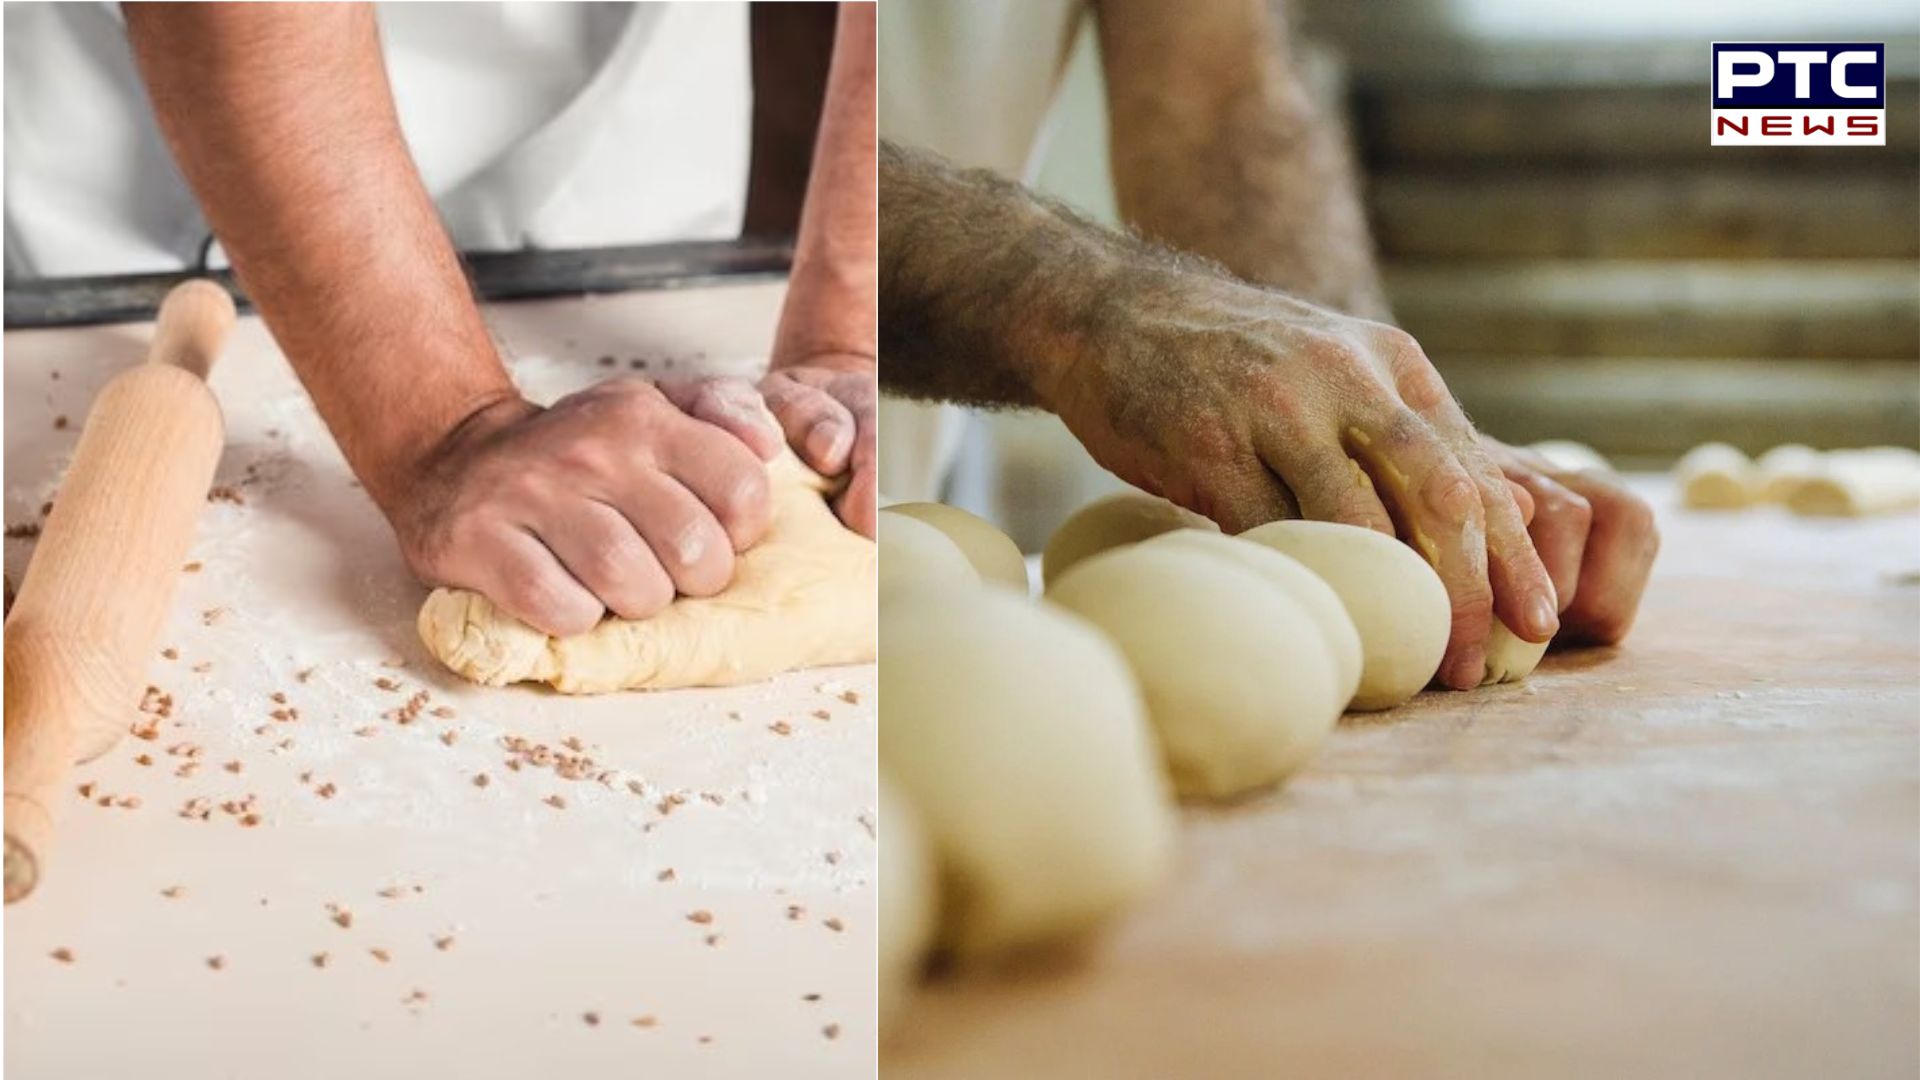 Bread making: Ever wondered how your daily breakfast staple is made? Watch Now